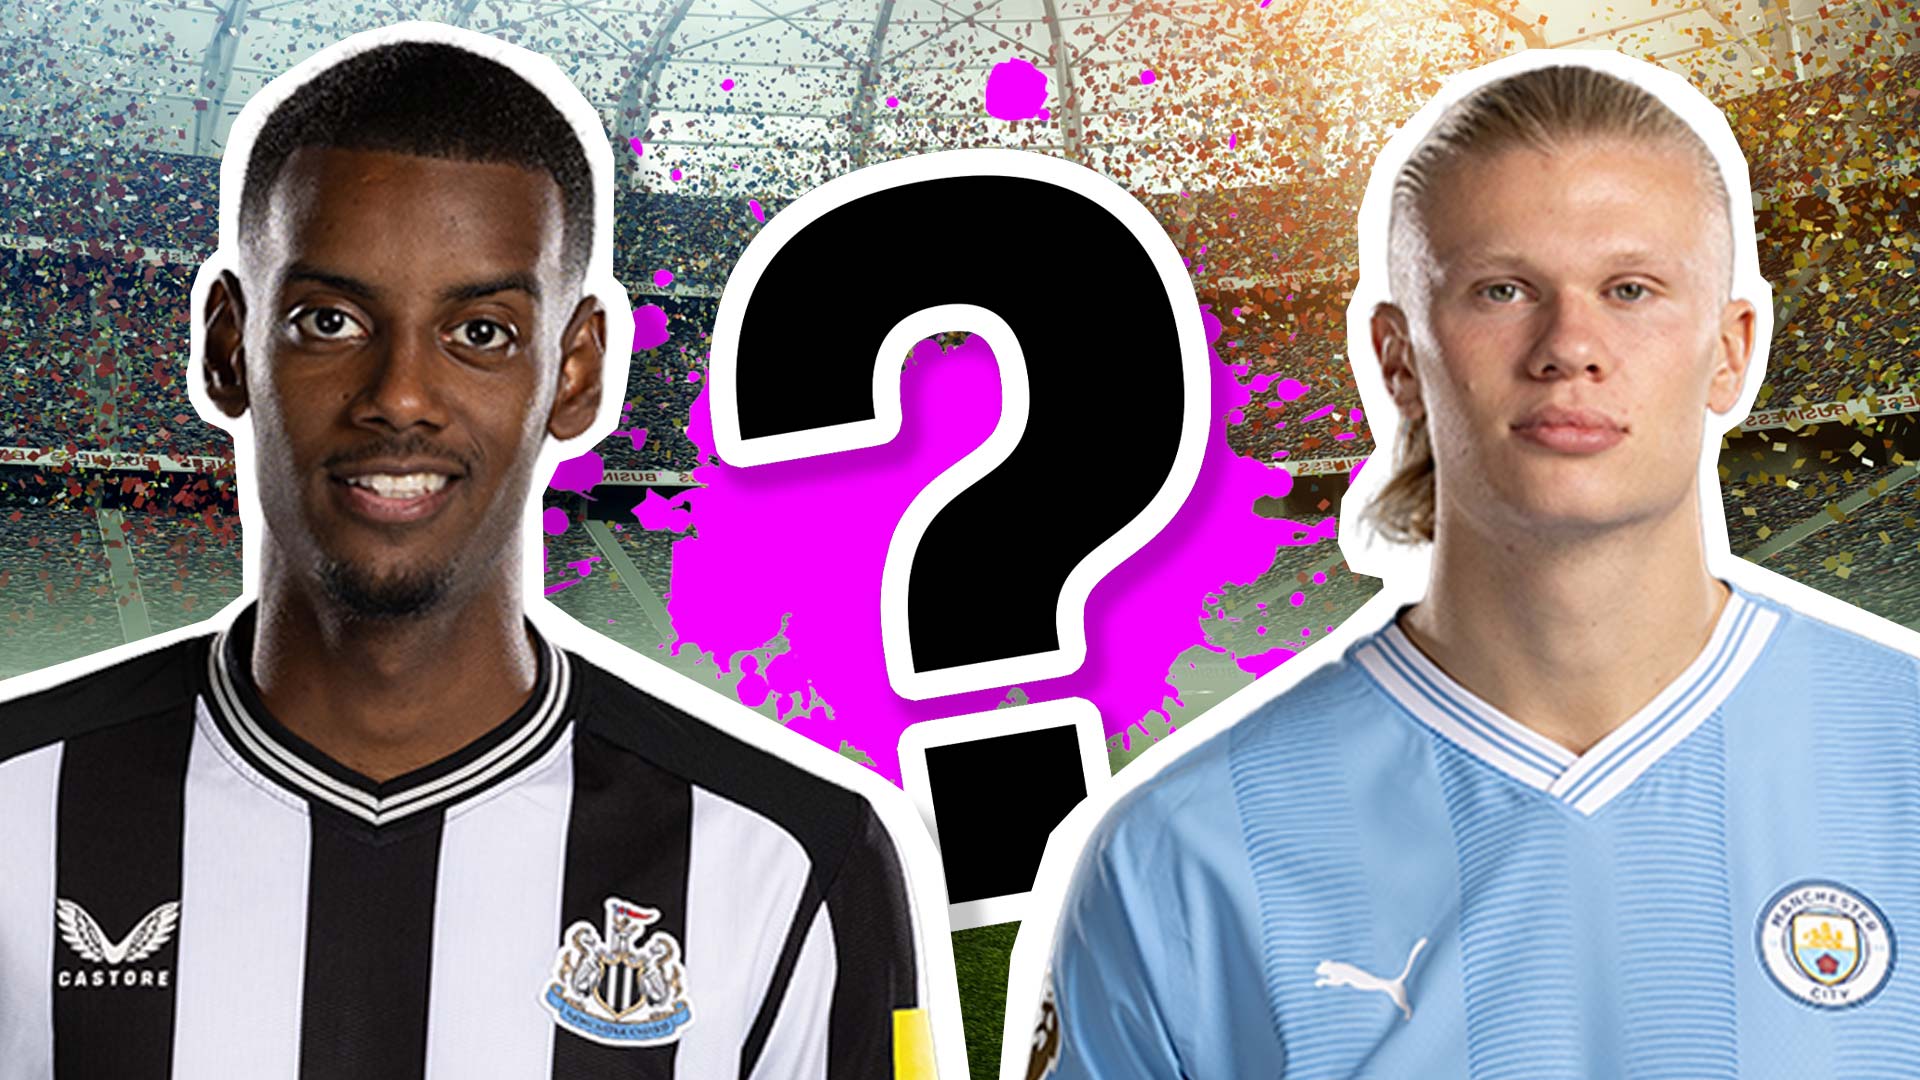 GUESS THE PLAYERS BY TRANSFERS - FOOTBALL QUIZ 2023 #2 